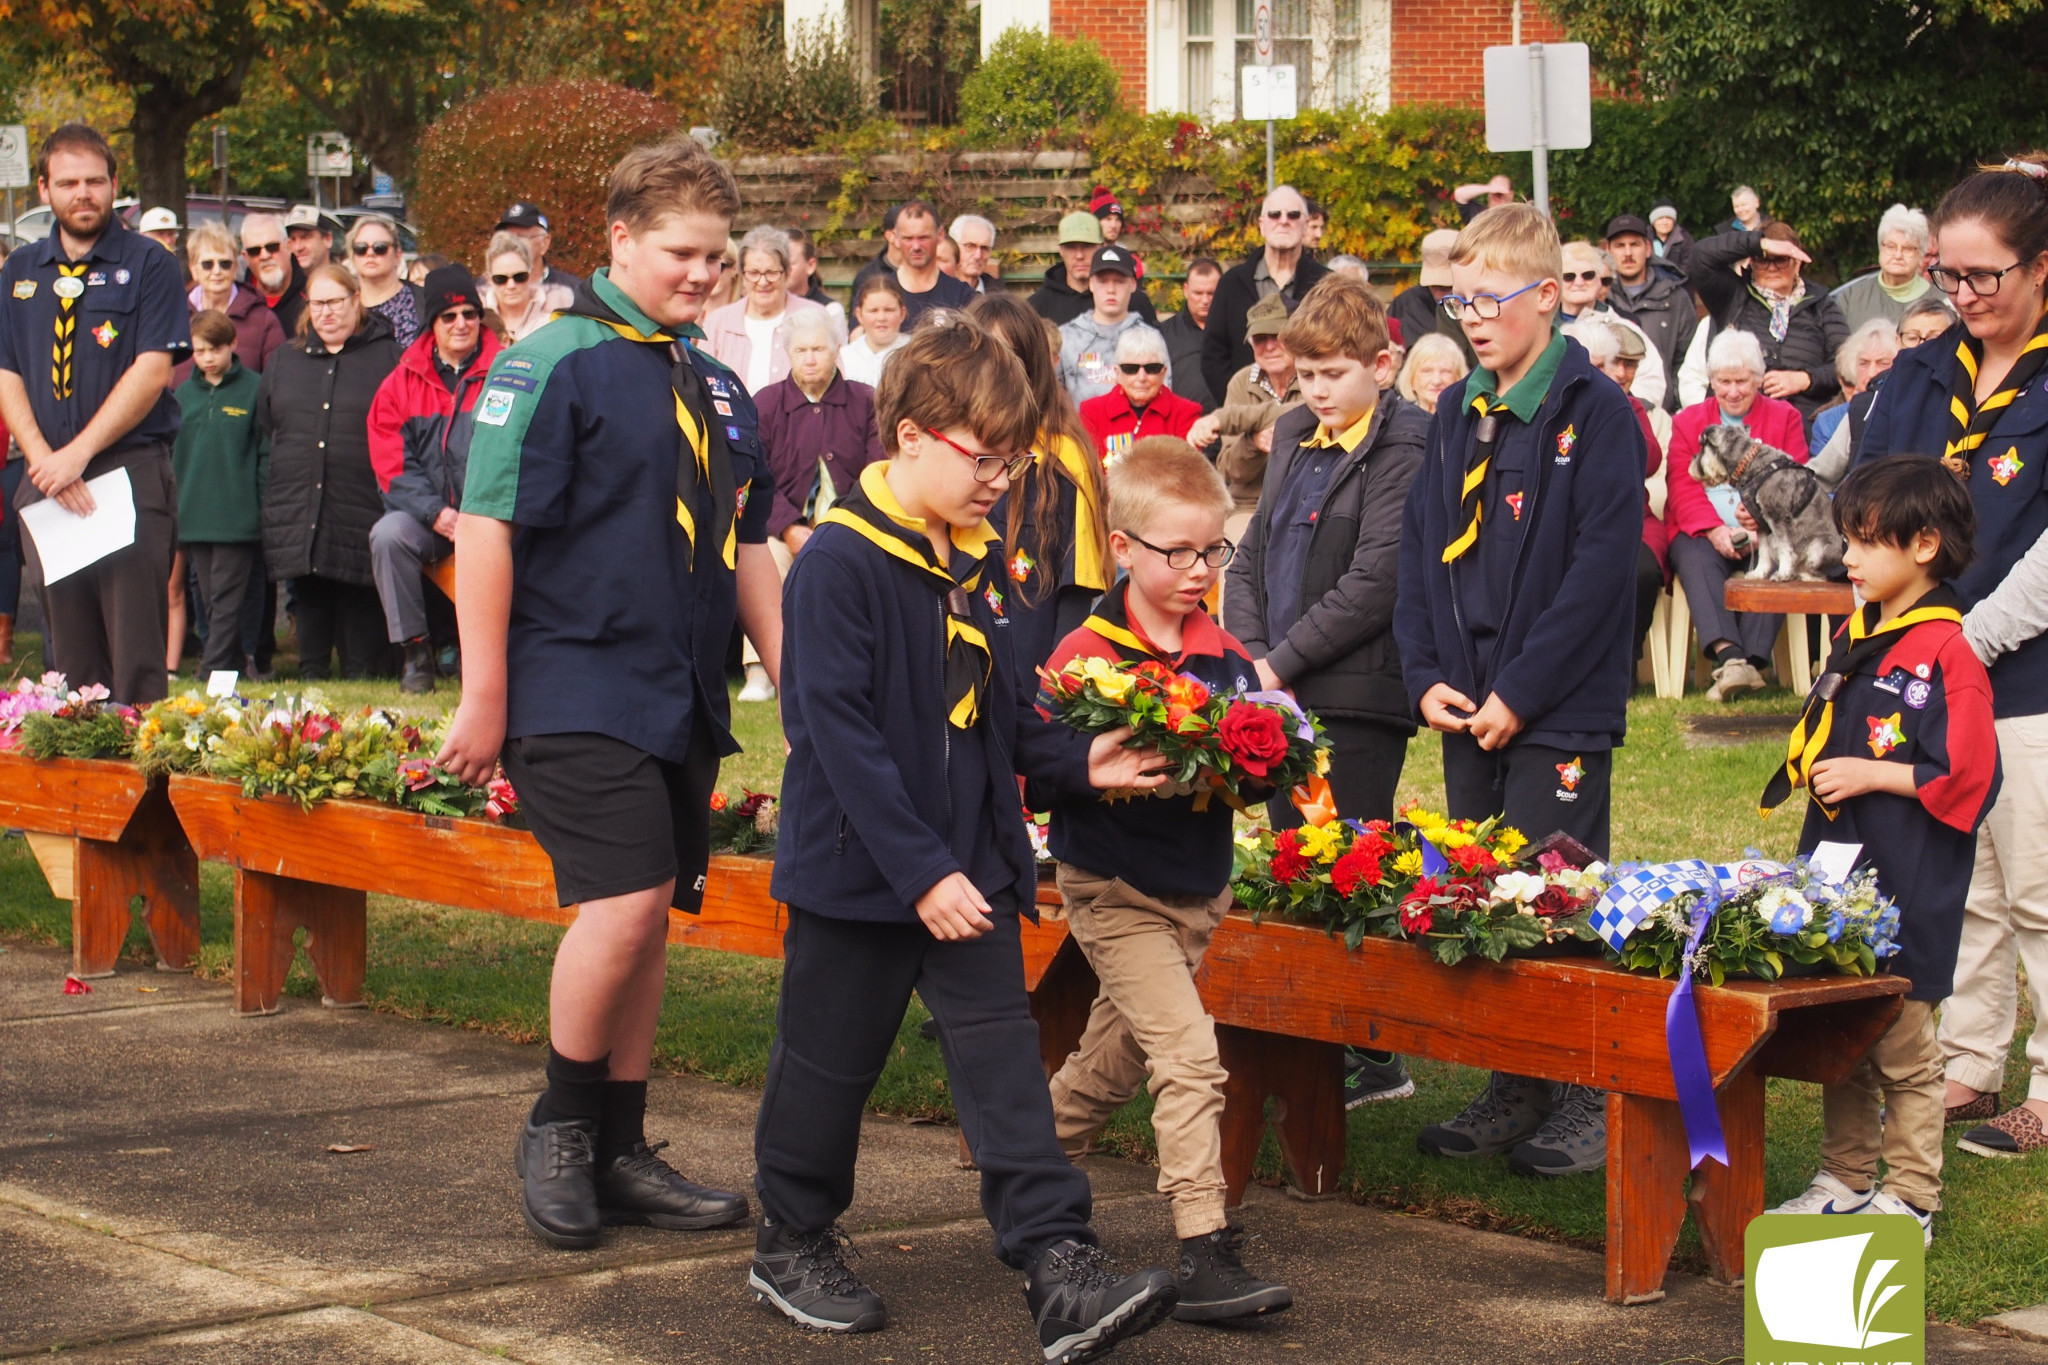 Members of the 1st Cobden Scout Group had an integral role in the service.